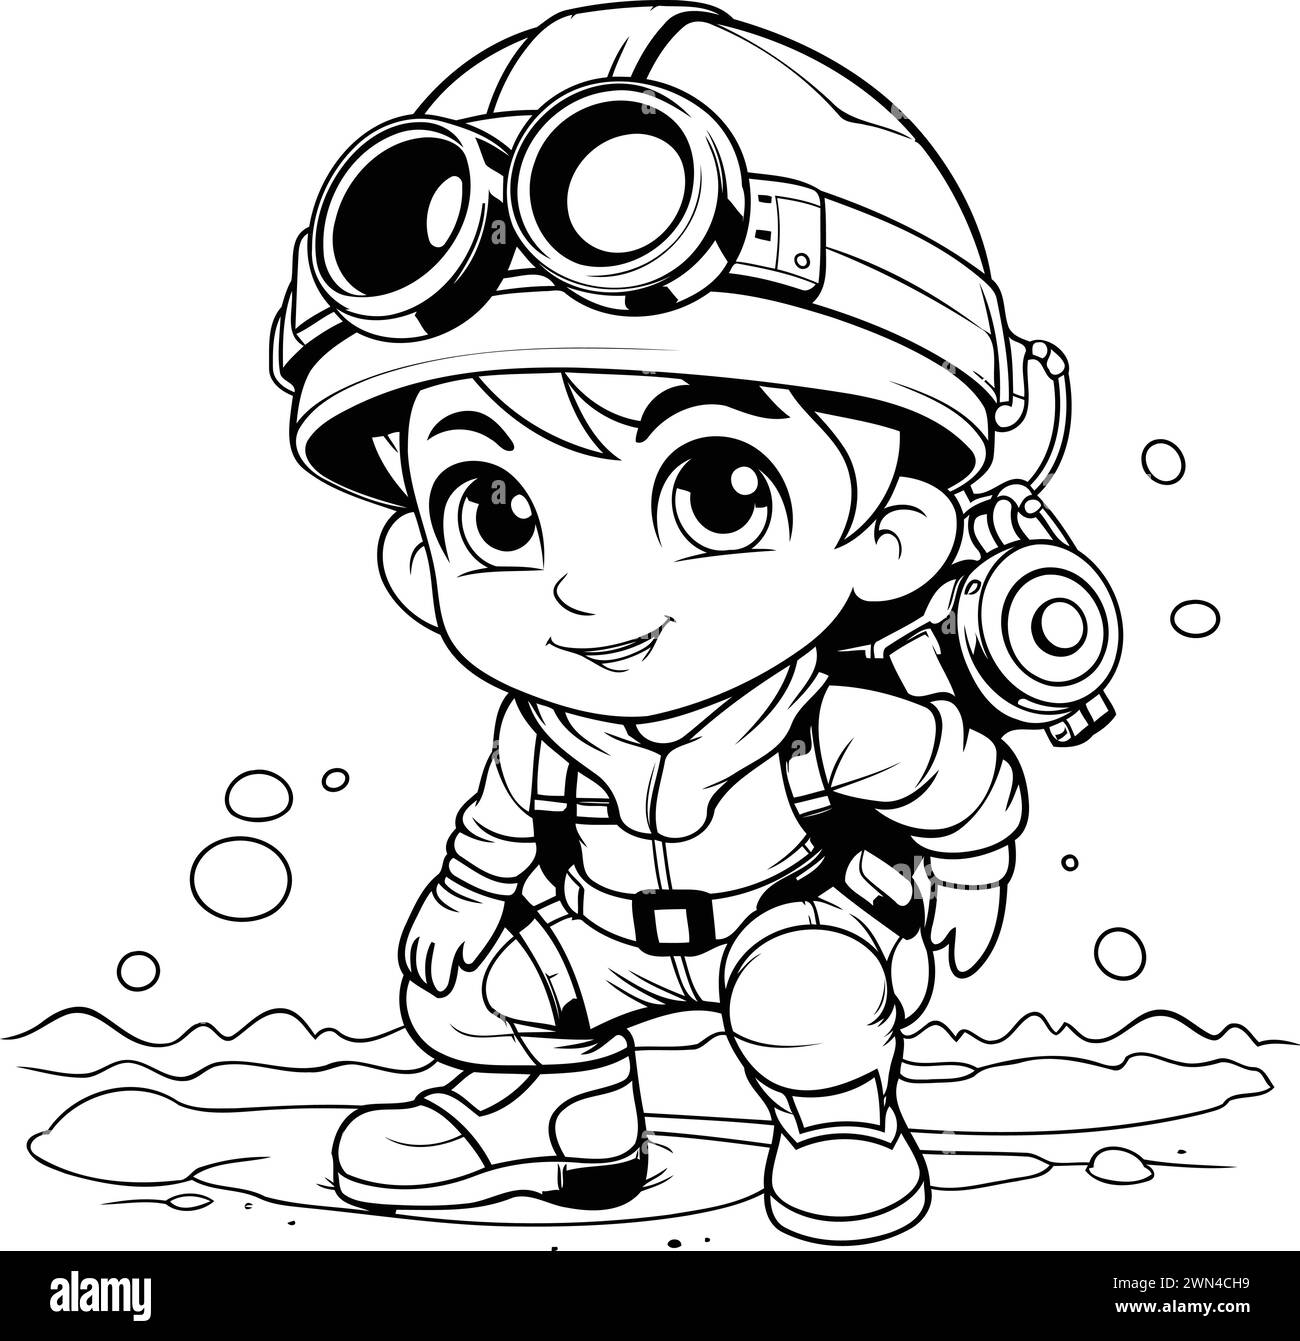 Black and White Cartoon Illustration of Cute Little Boy Wearing a Safety Helmet for Coloring Book Stock Vector